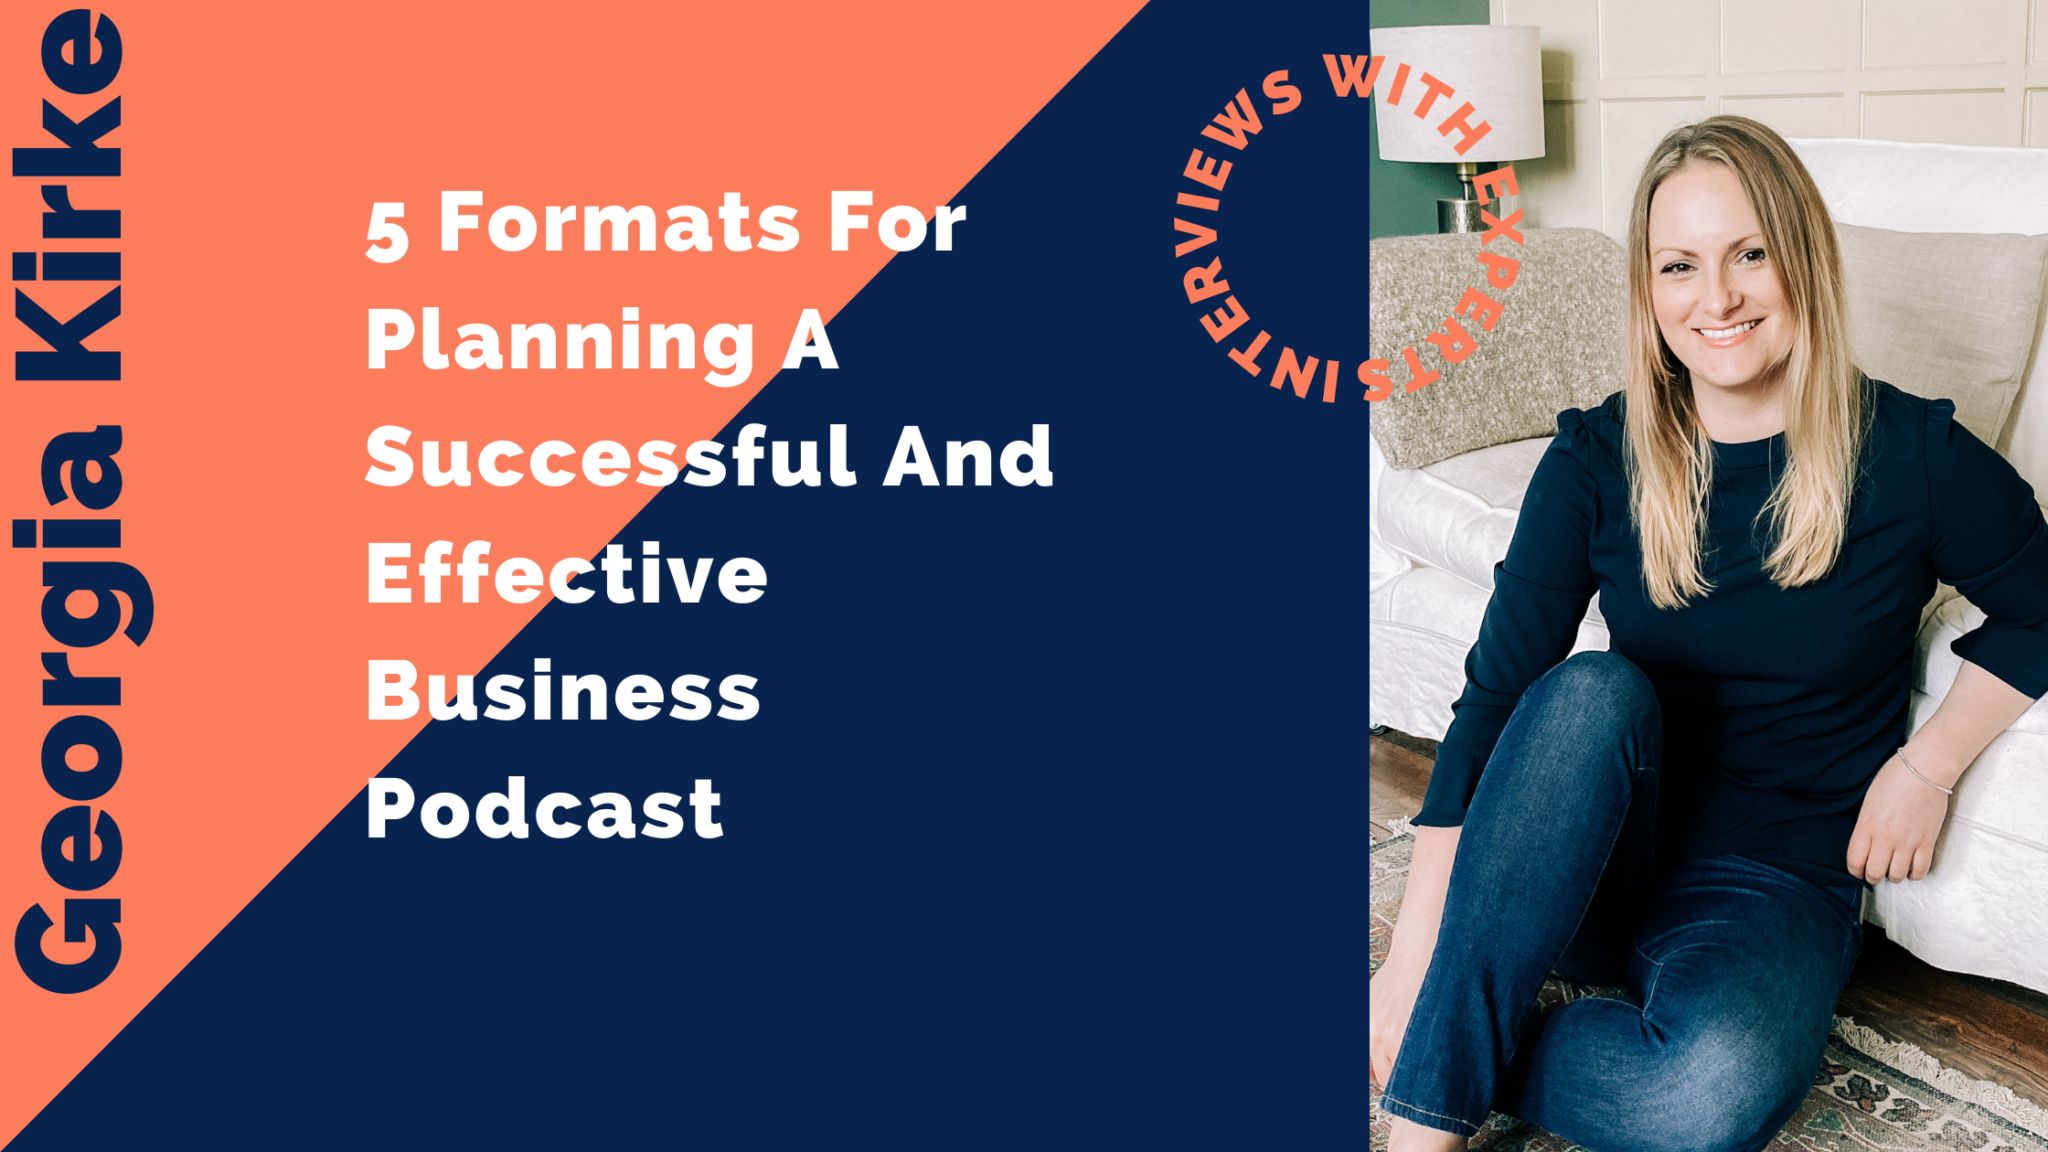 5 Formats For Planning A Successful And Effective Business Podcast